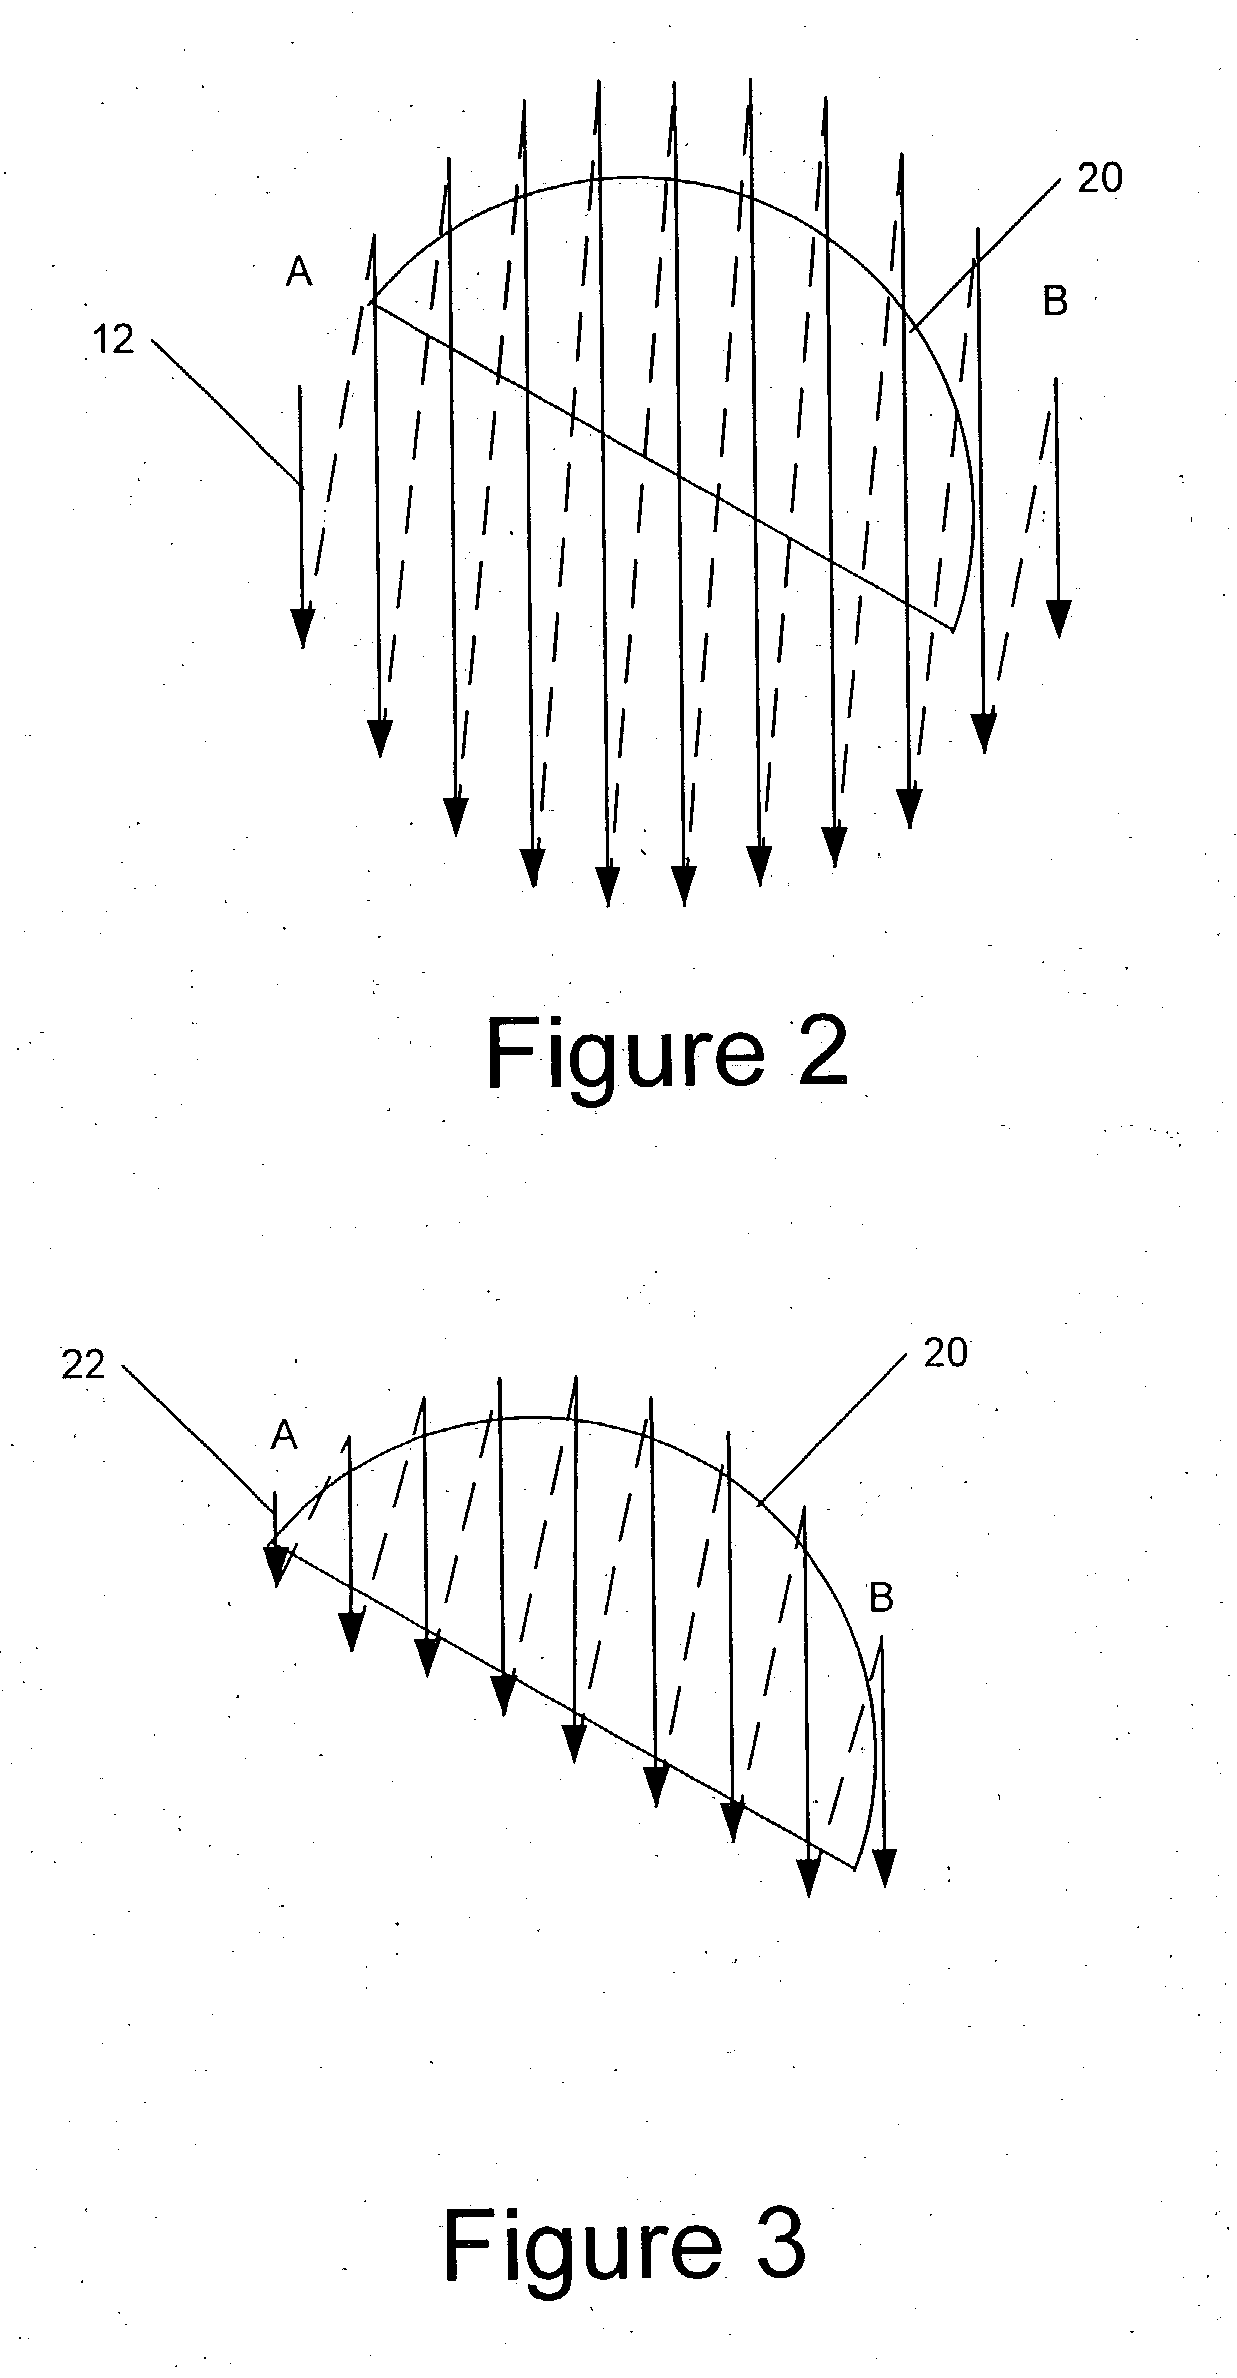 Methods, systems and computer program products for dynamically controlling a semiconductor dicing saw